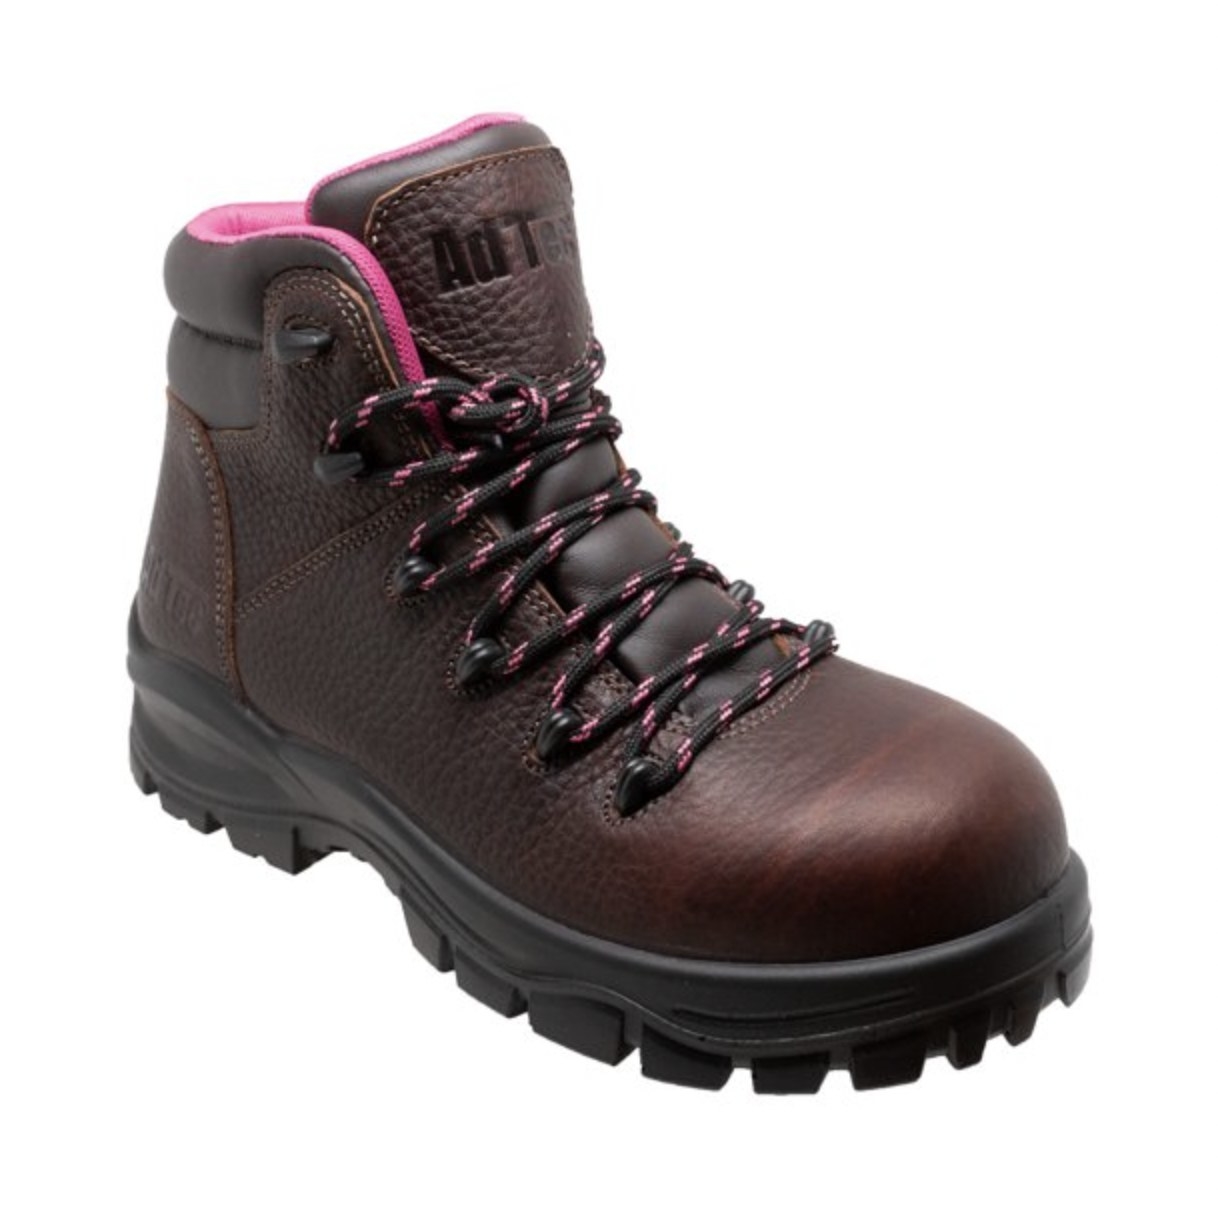 a dark brown work boot lined with pink fabric